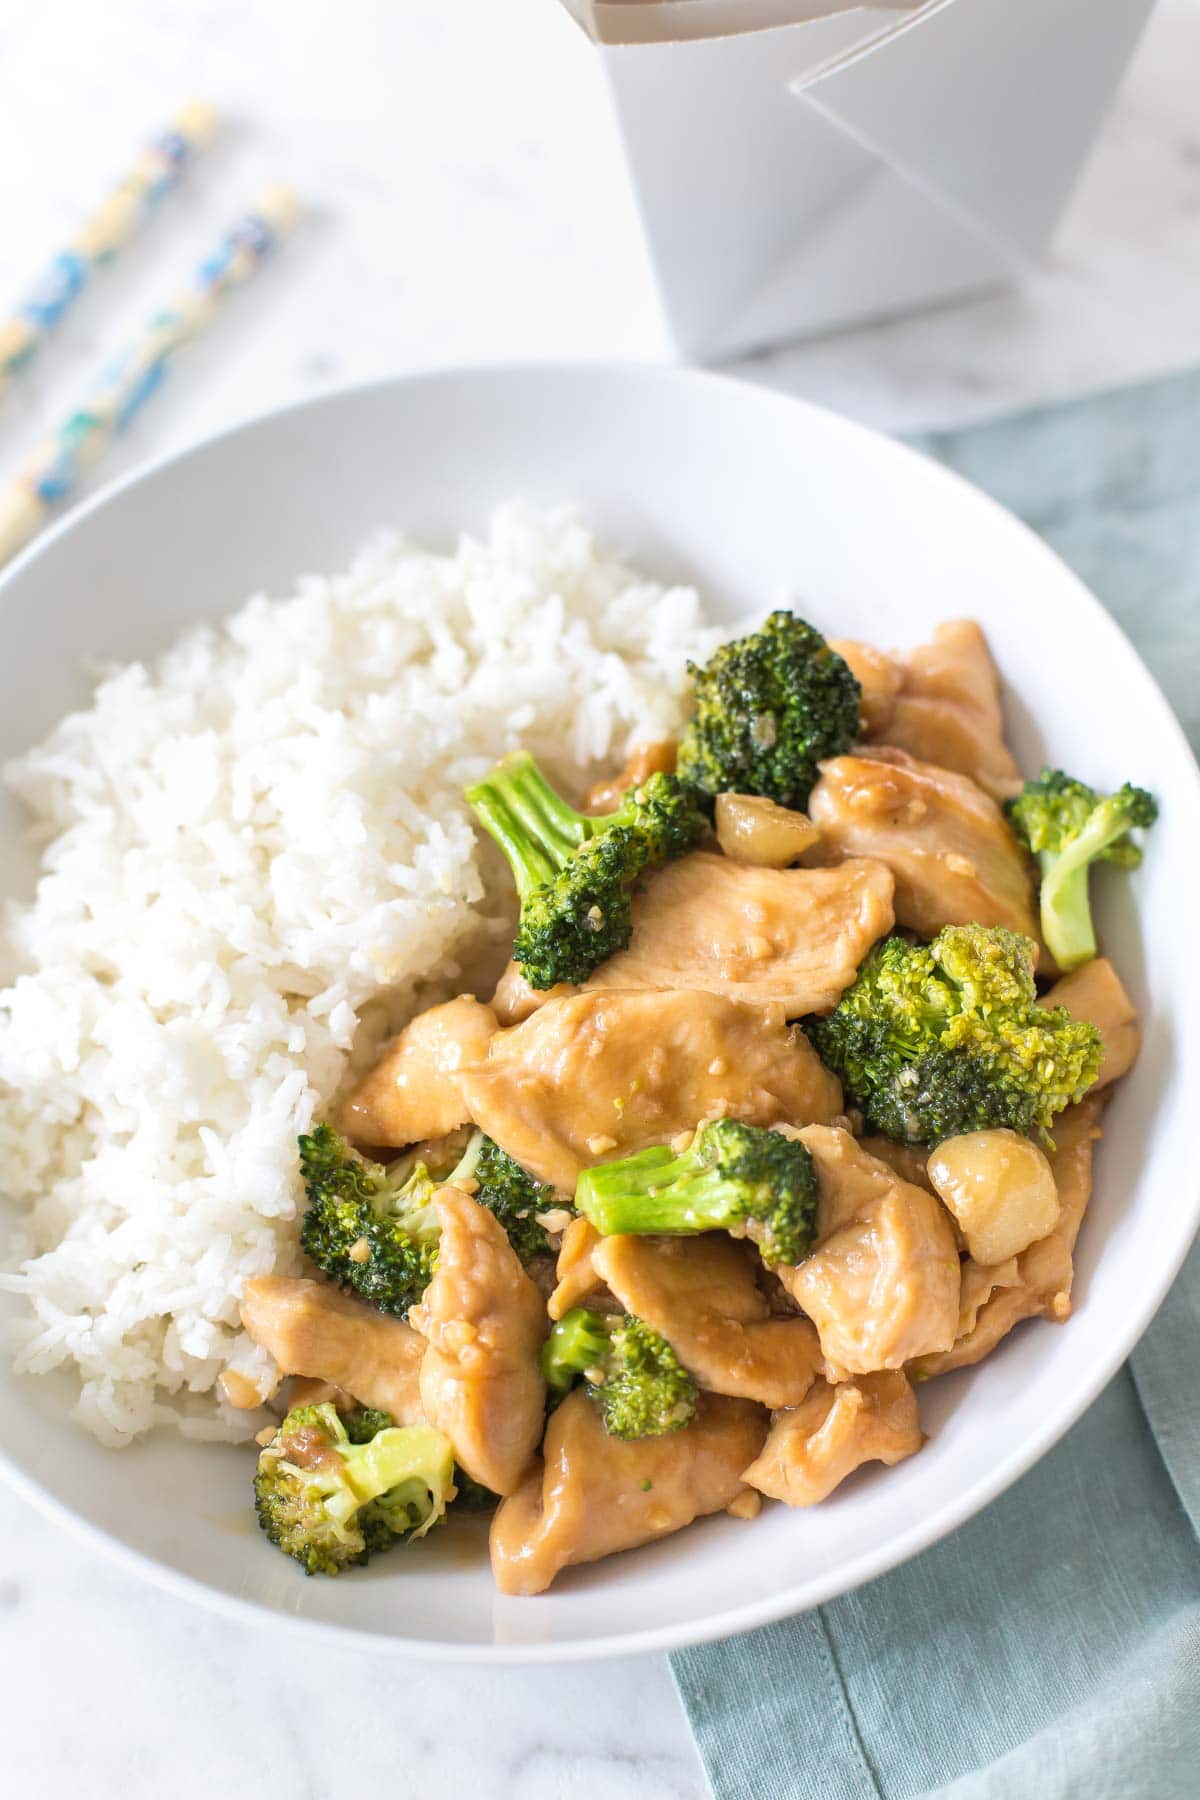 Chinese chicken and broccoli in a bowl with white rice